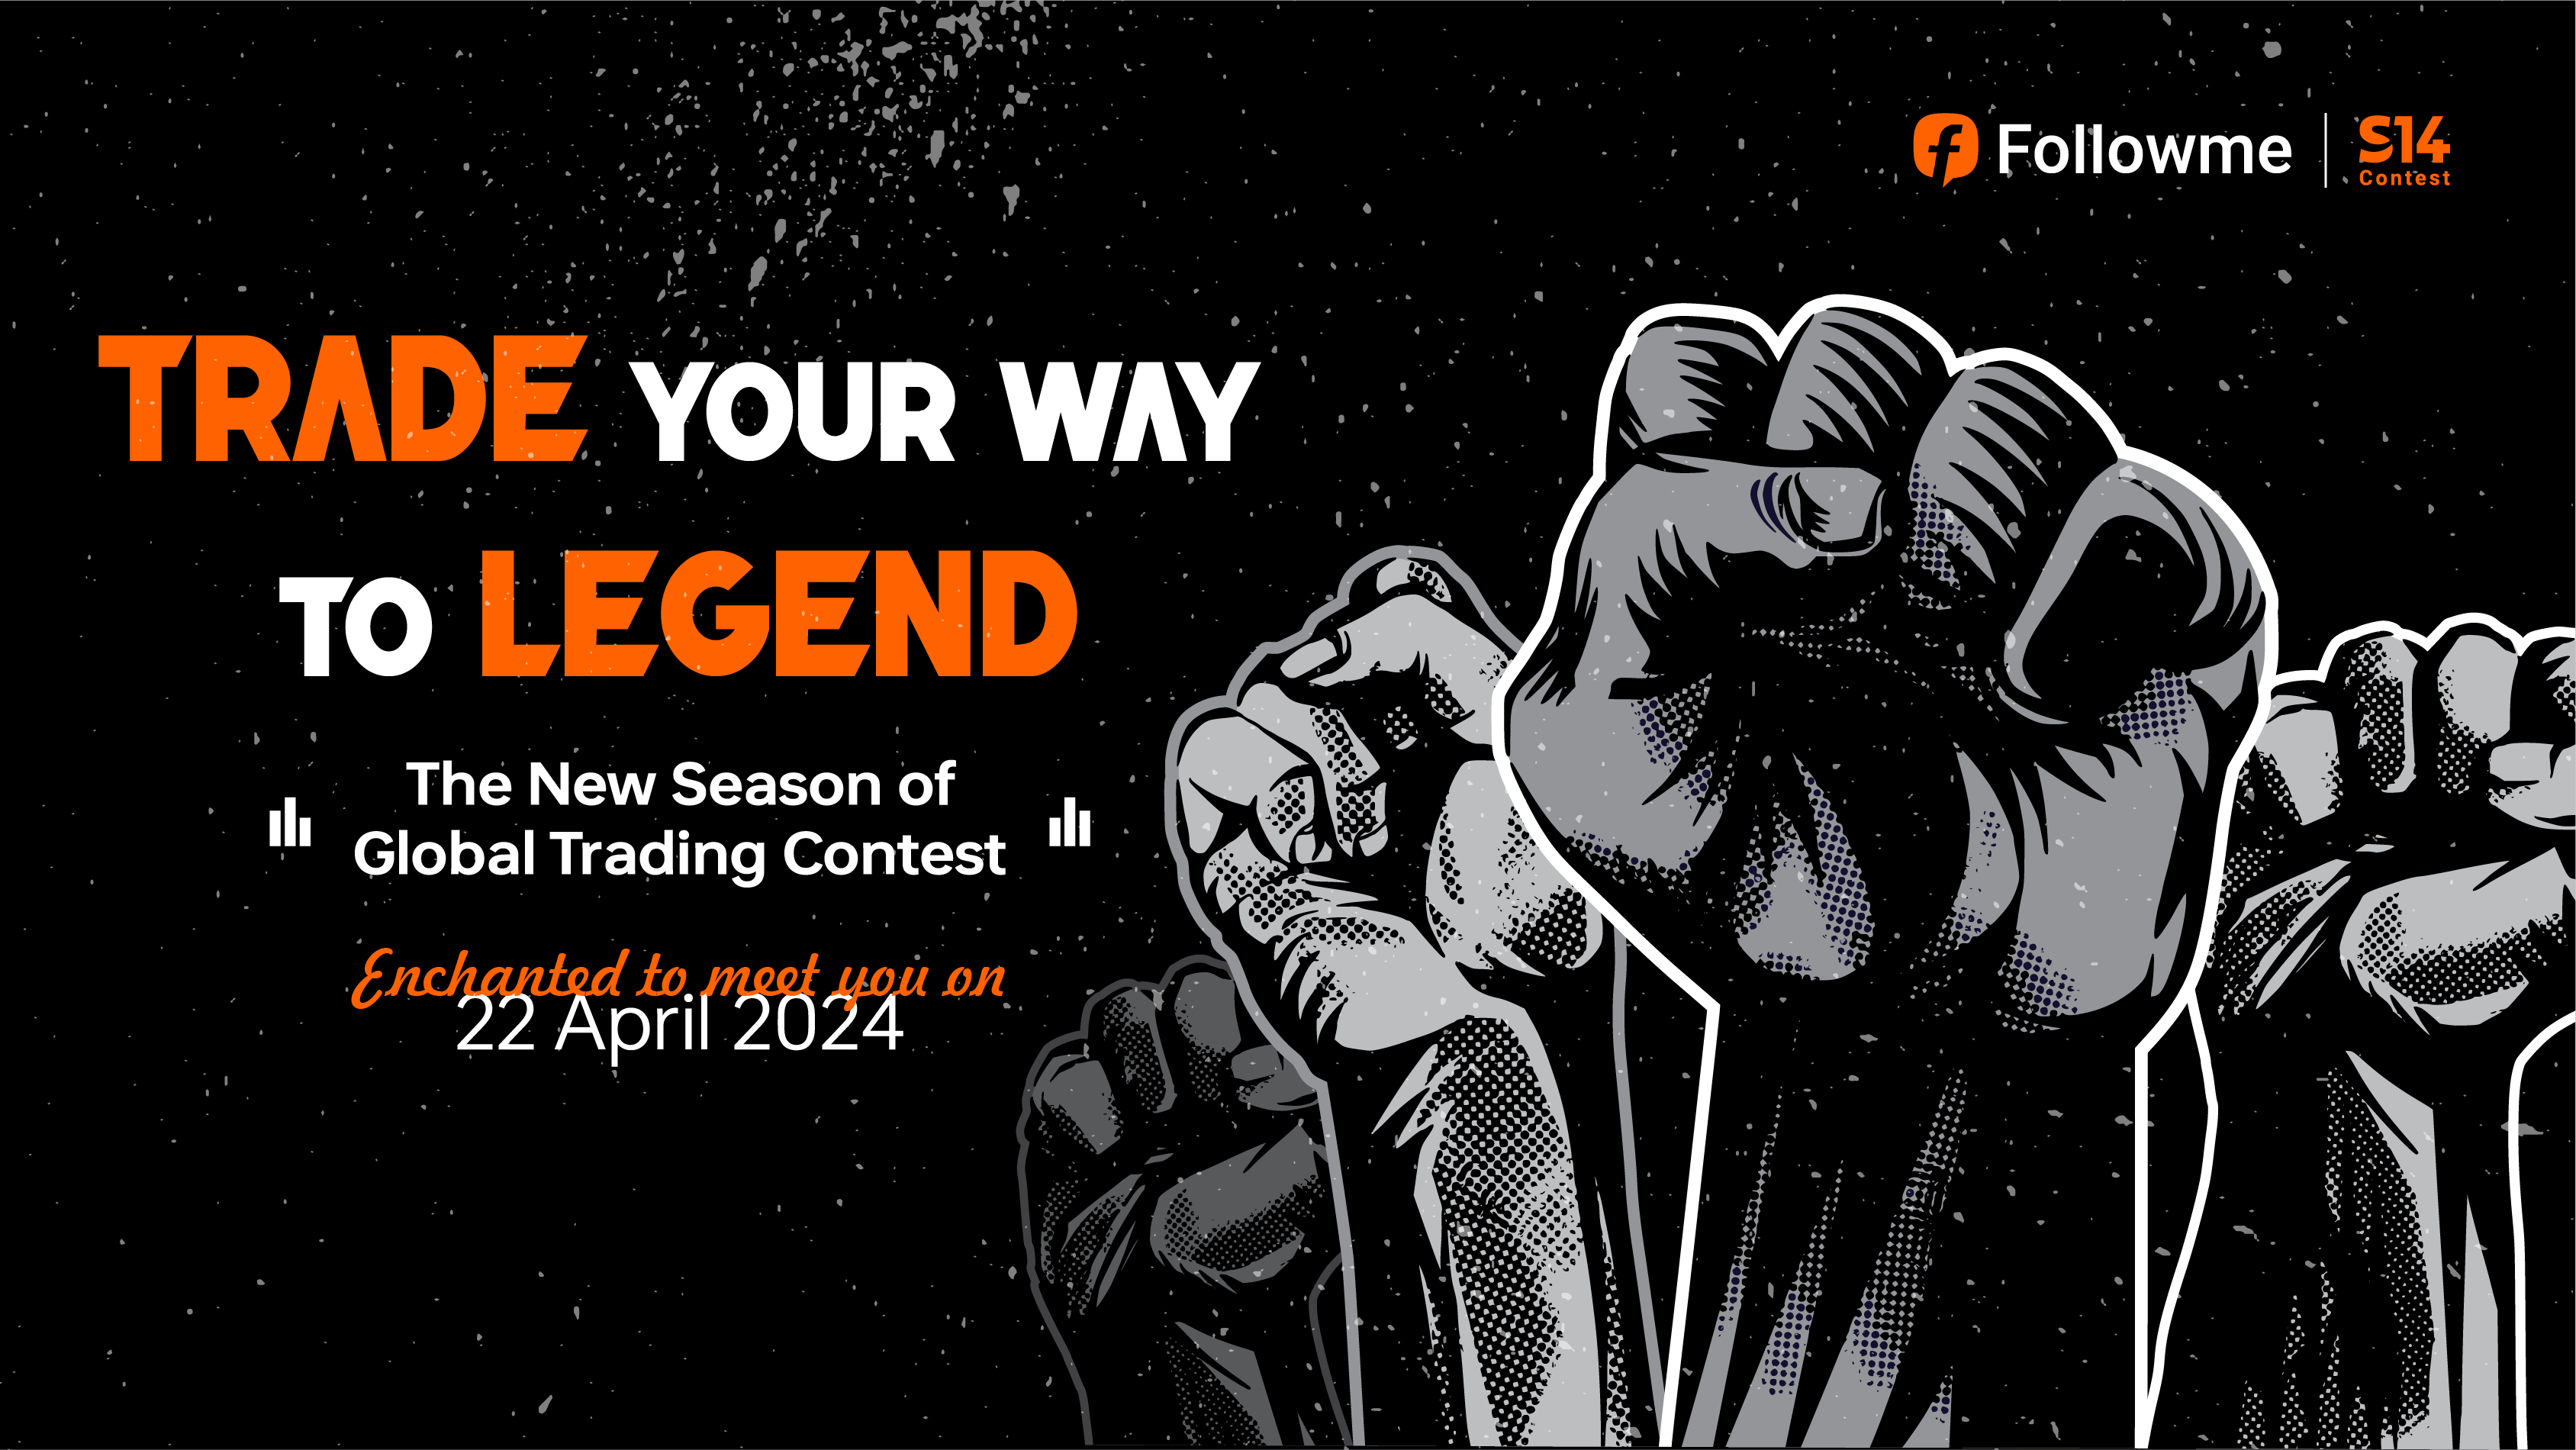 April 22 | Are you ready for the S14 Global Trading Contest?